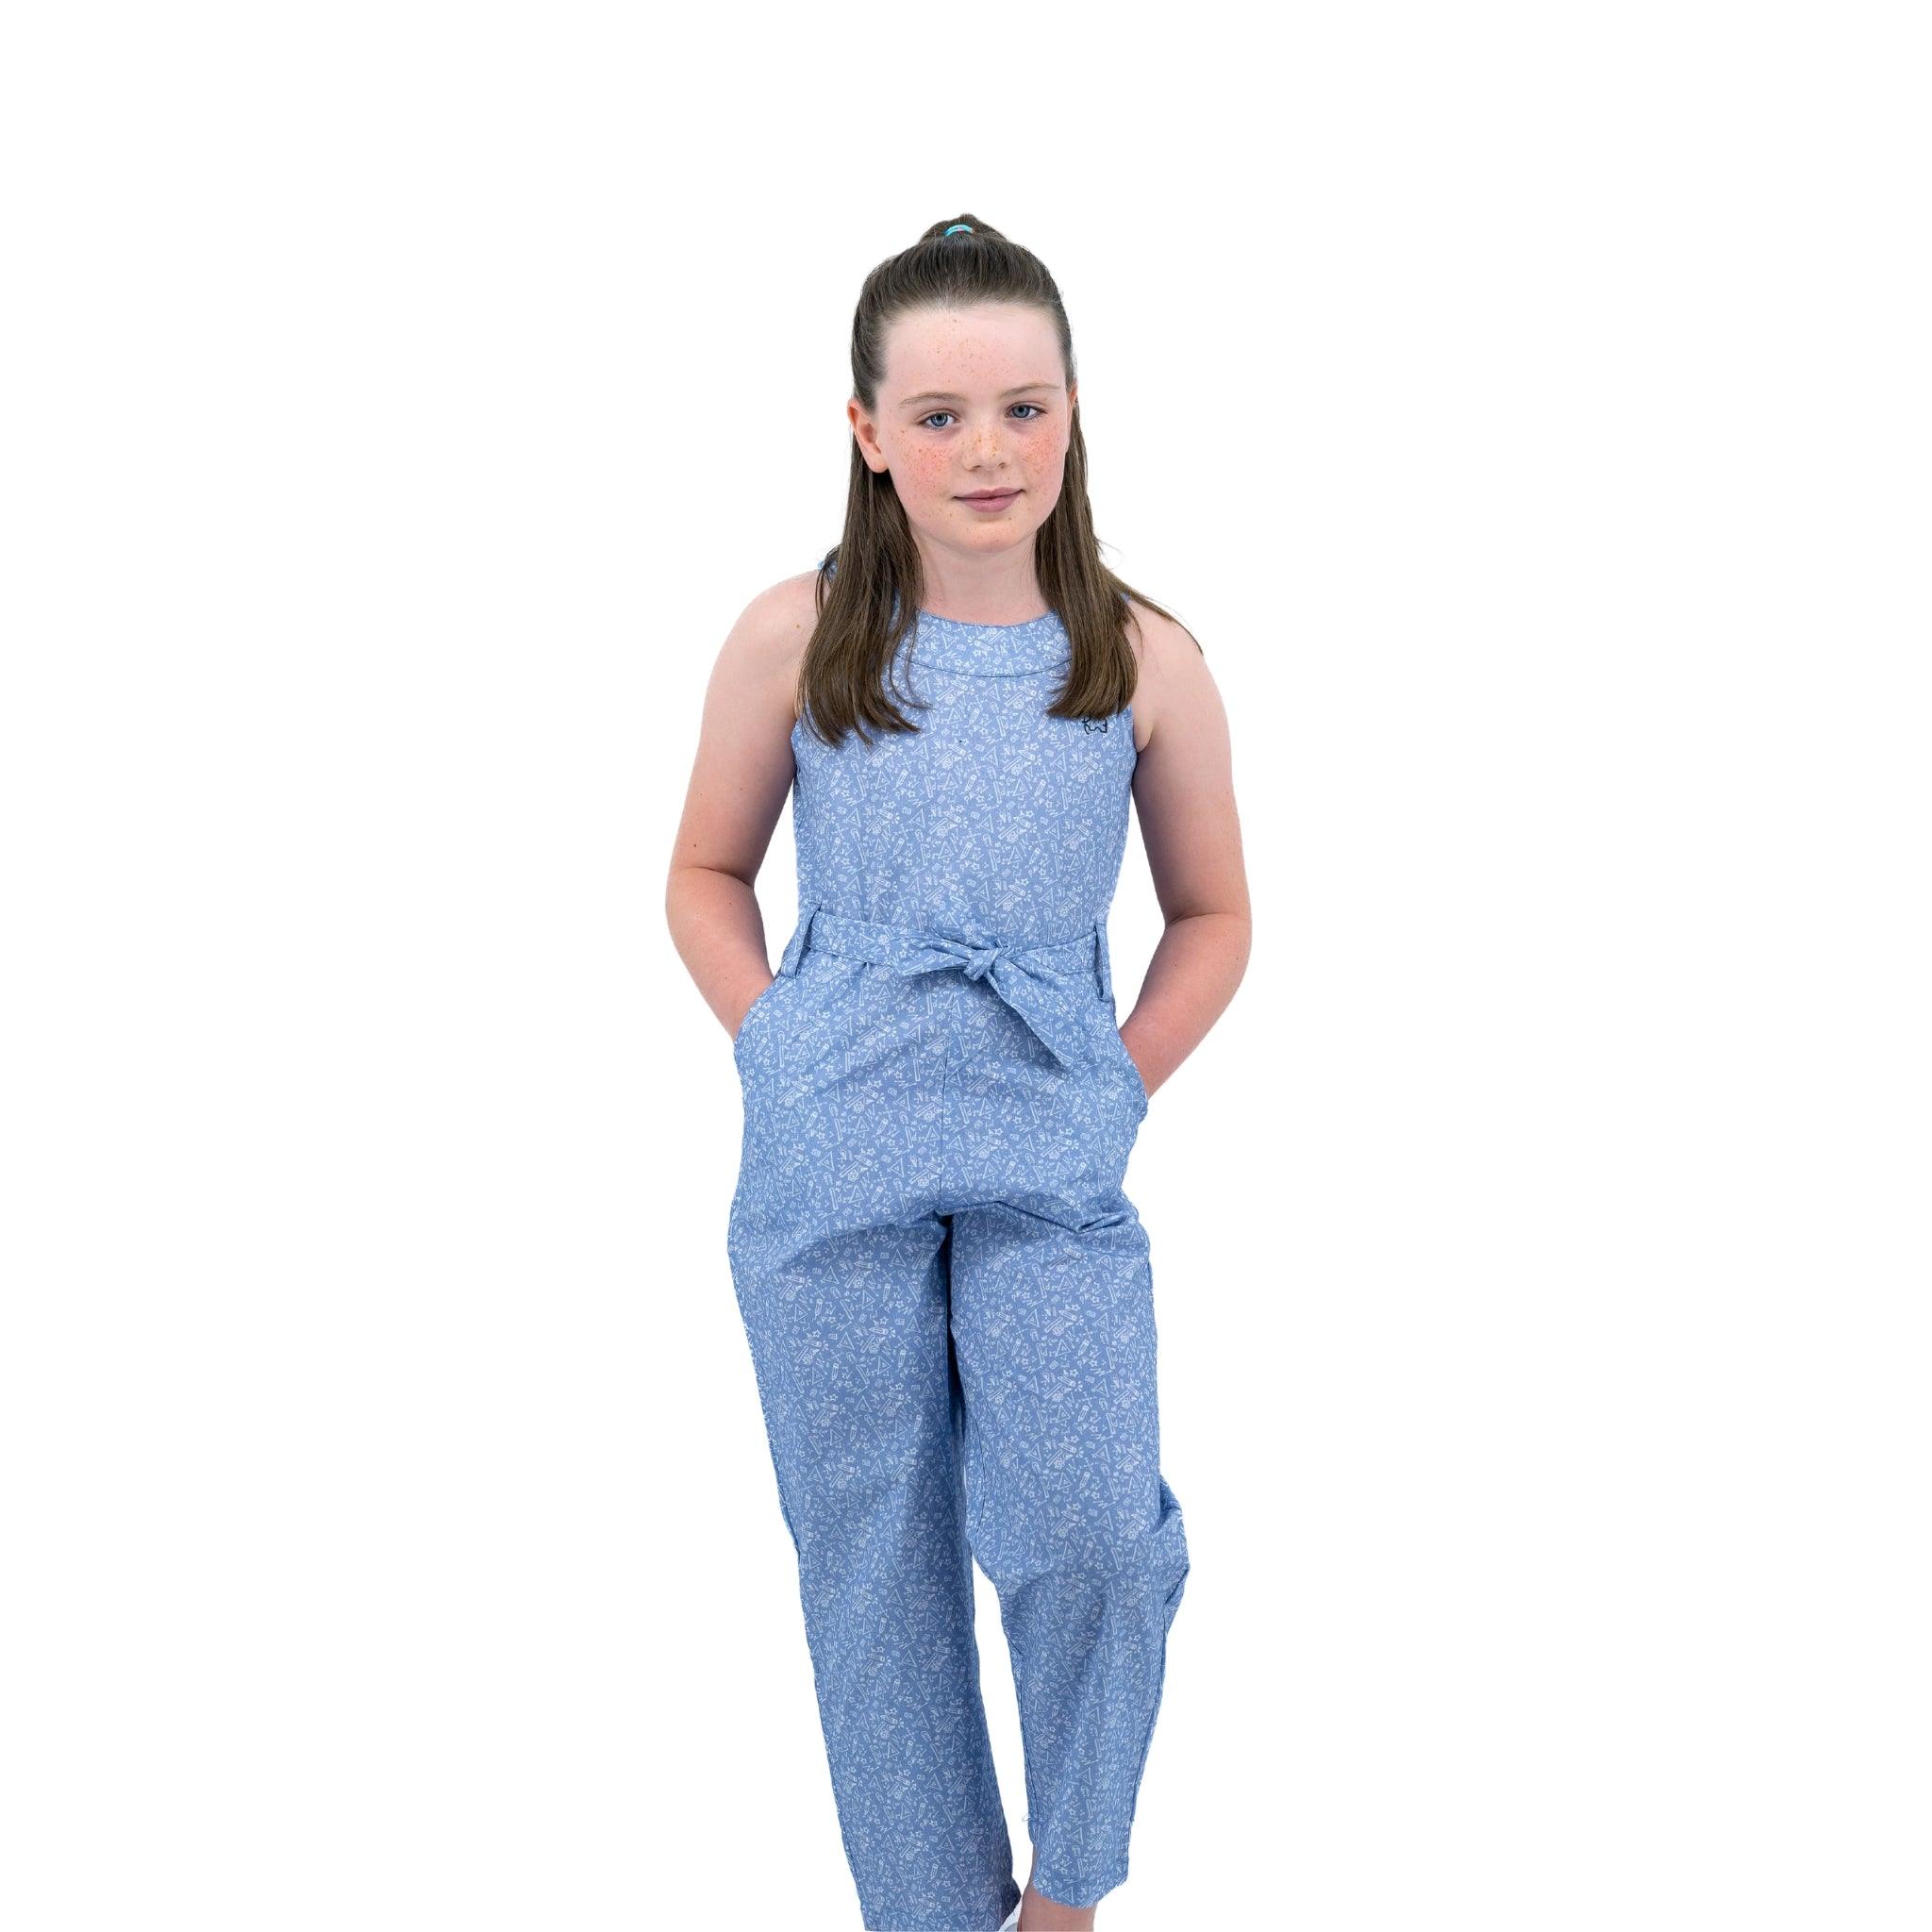 A young girl stands posing in a Karee Purple Impression Cotton Jumpsuit for kids against a white background.